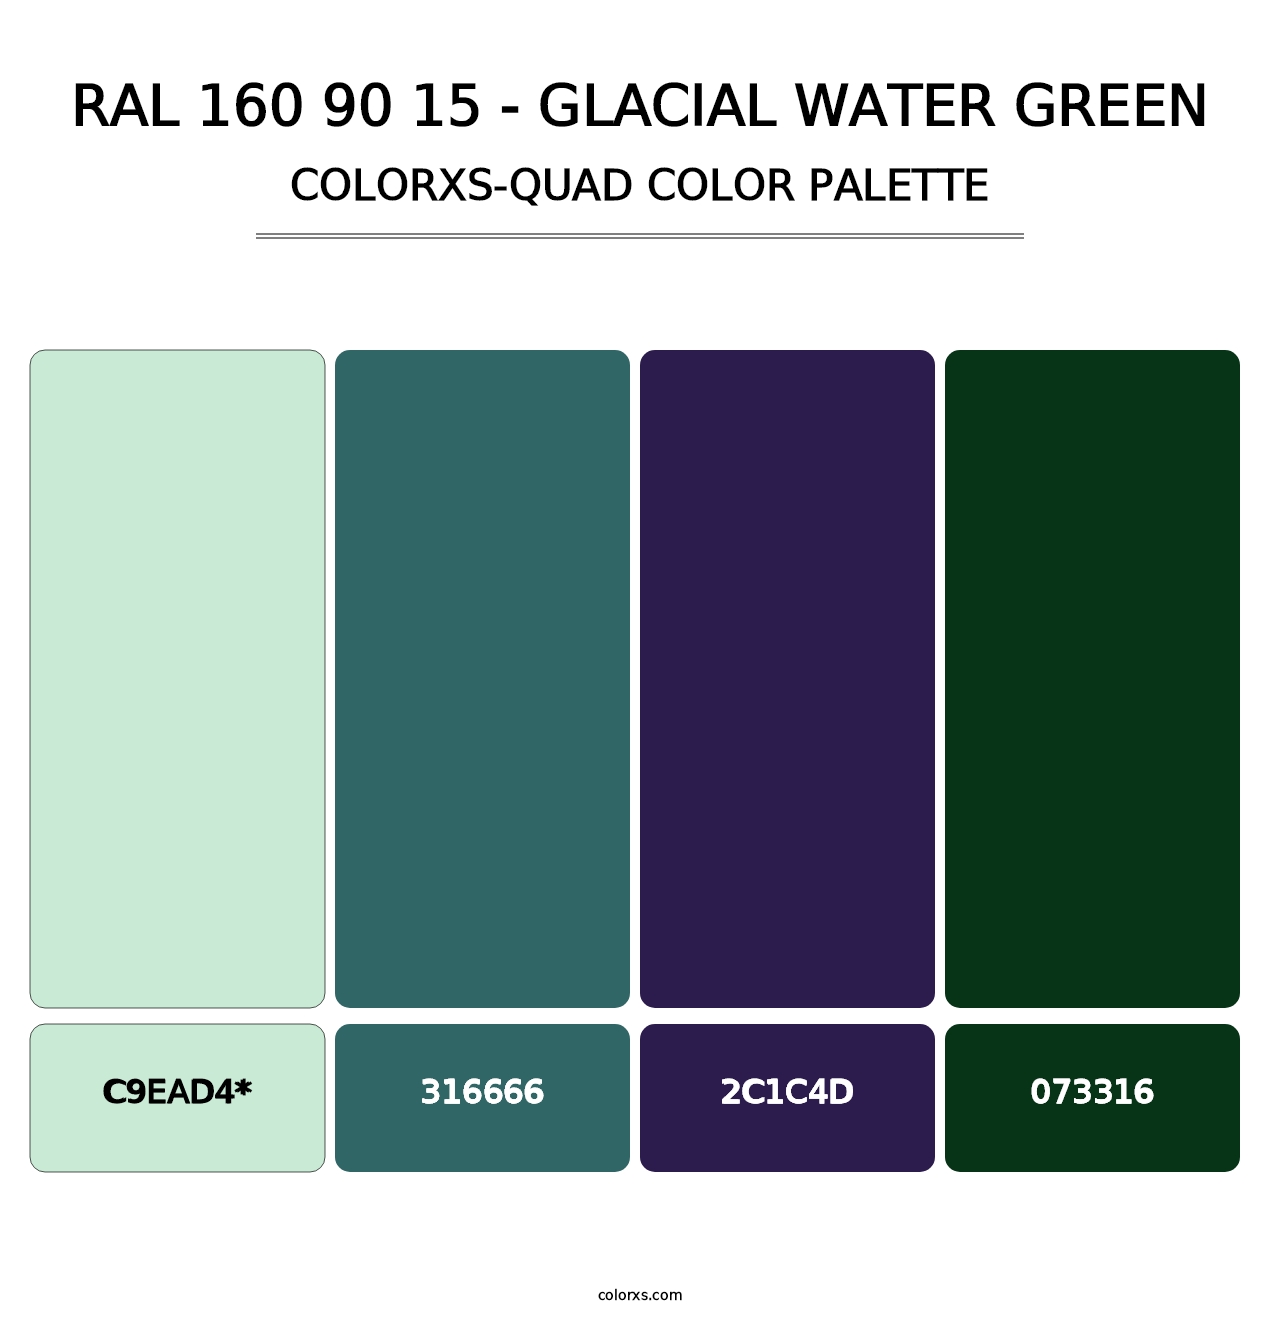 RAL 160 90 15 - Glacial Water Green - Colorxs Quad Palette